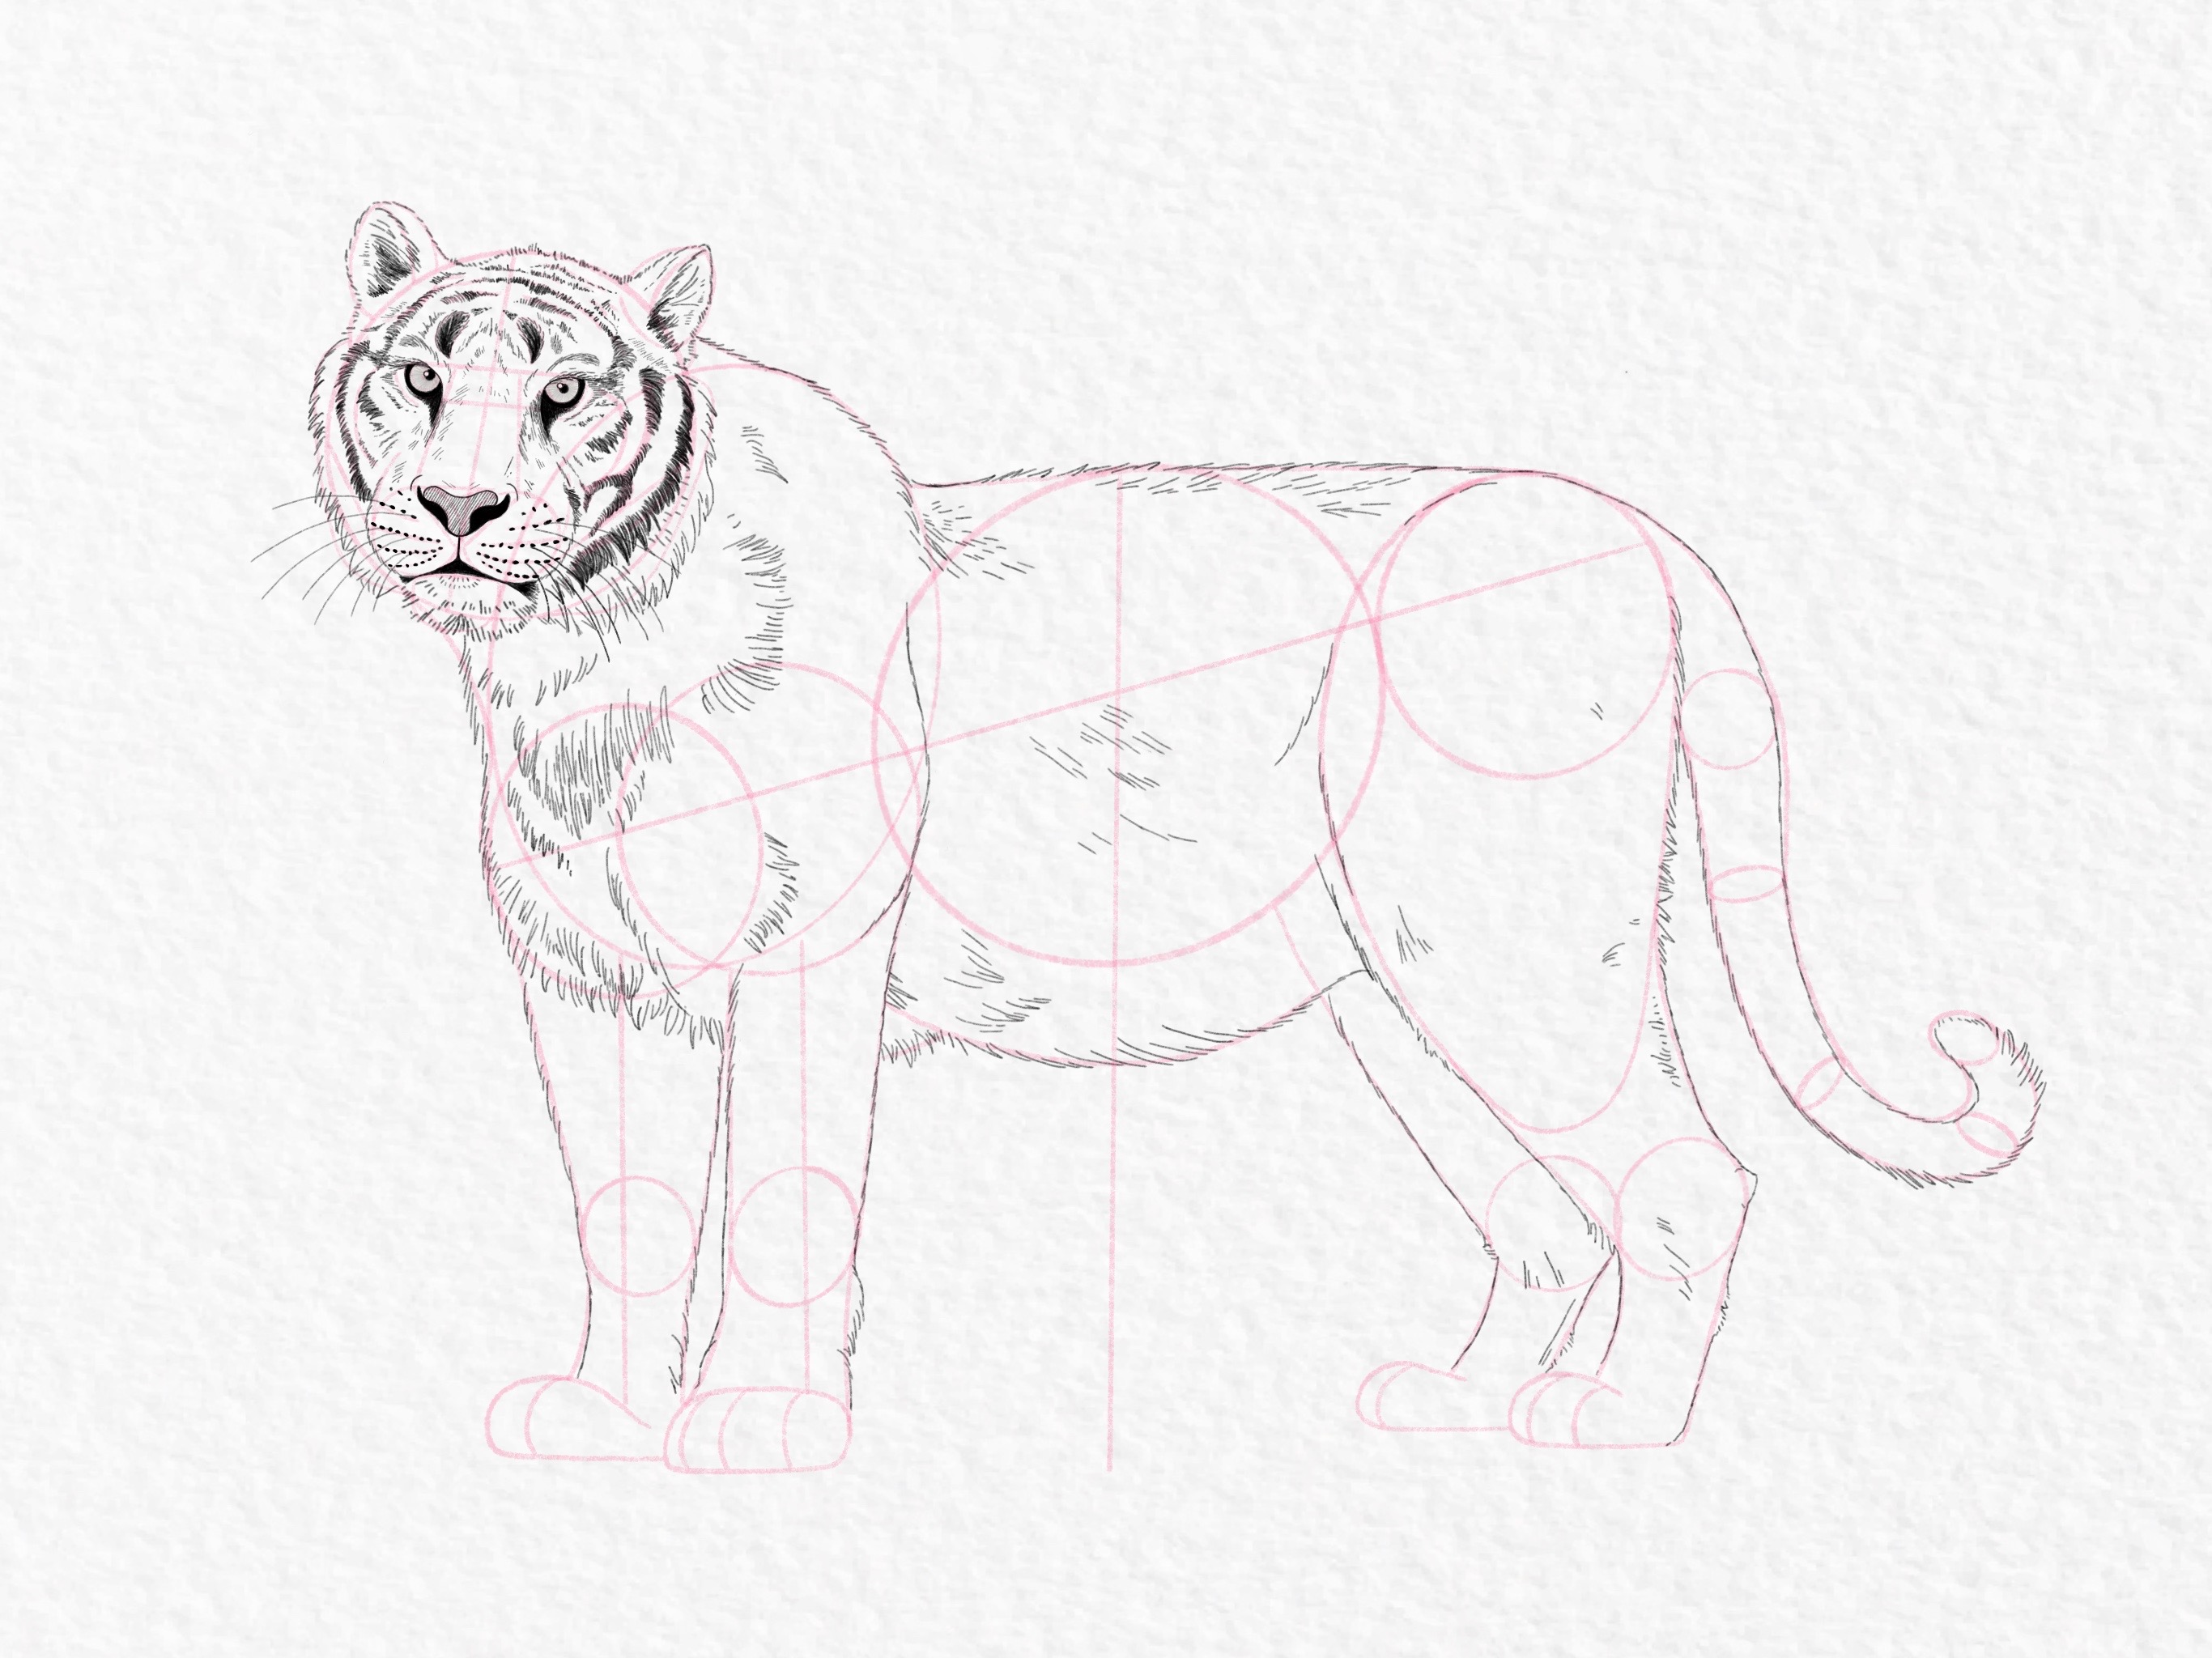 How to draw a tiger, step by step tutorial - step 40